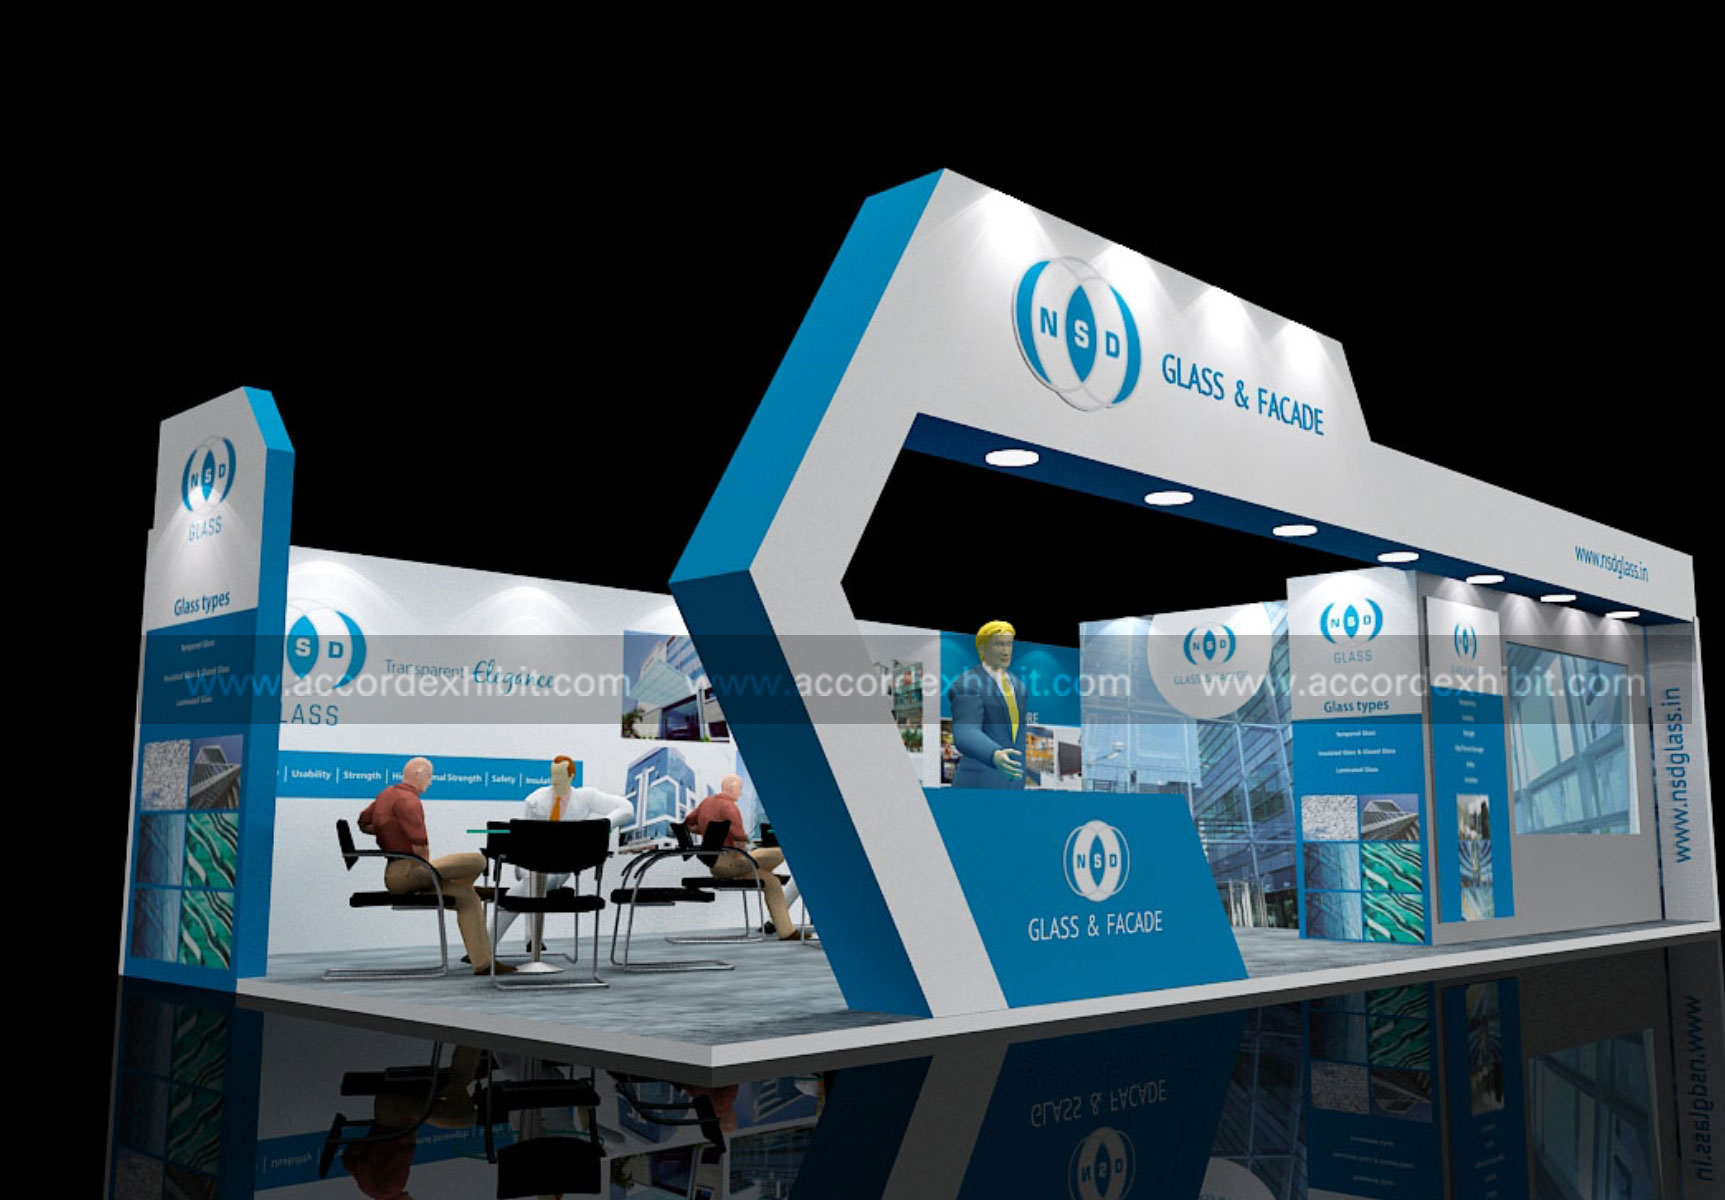 Exhibition Stall for NSD Glass